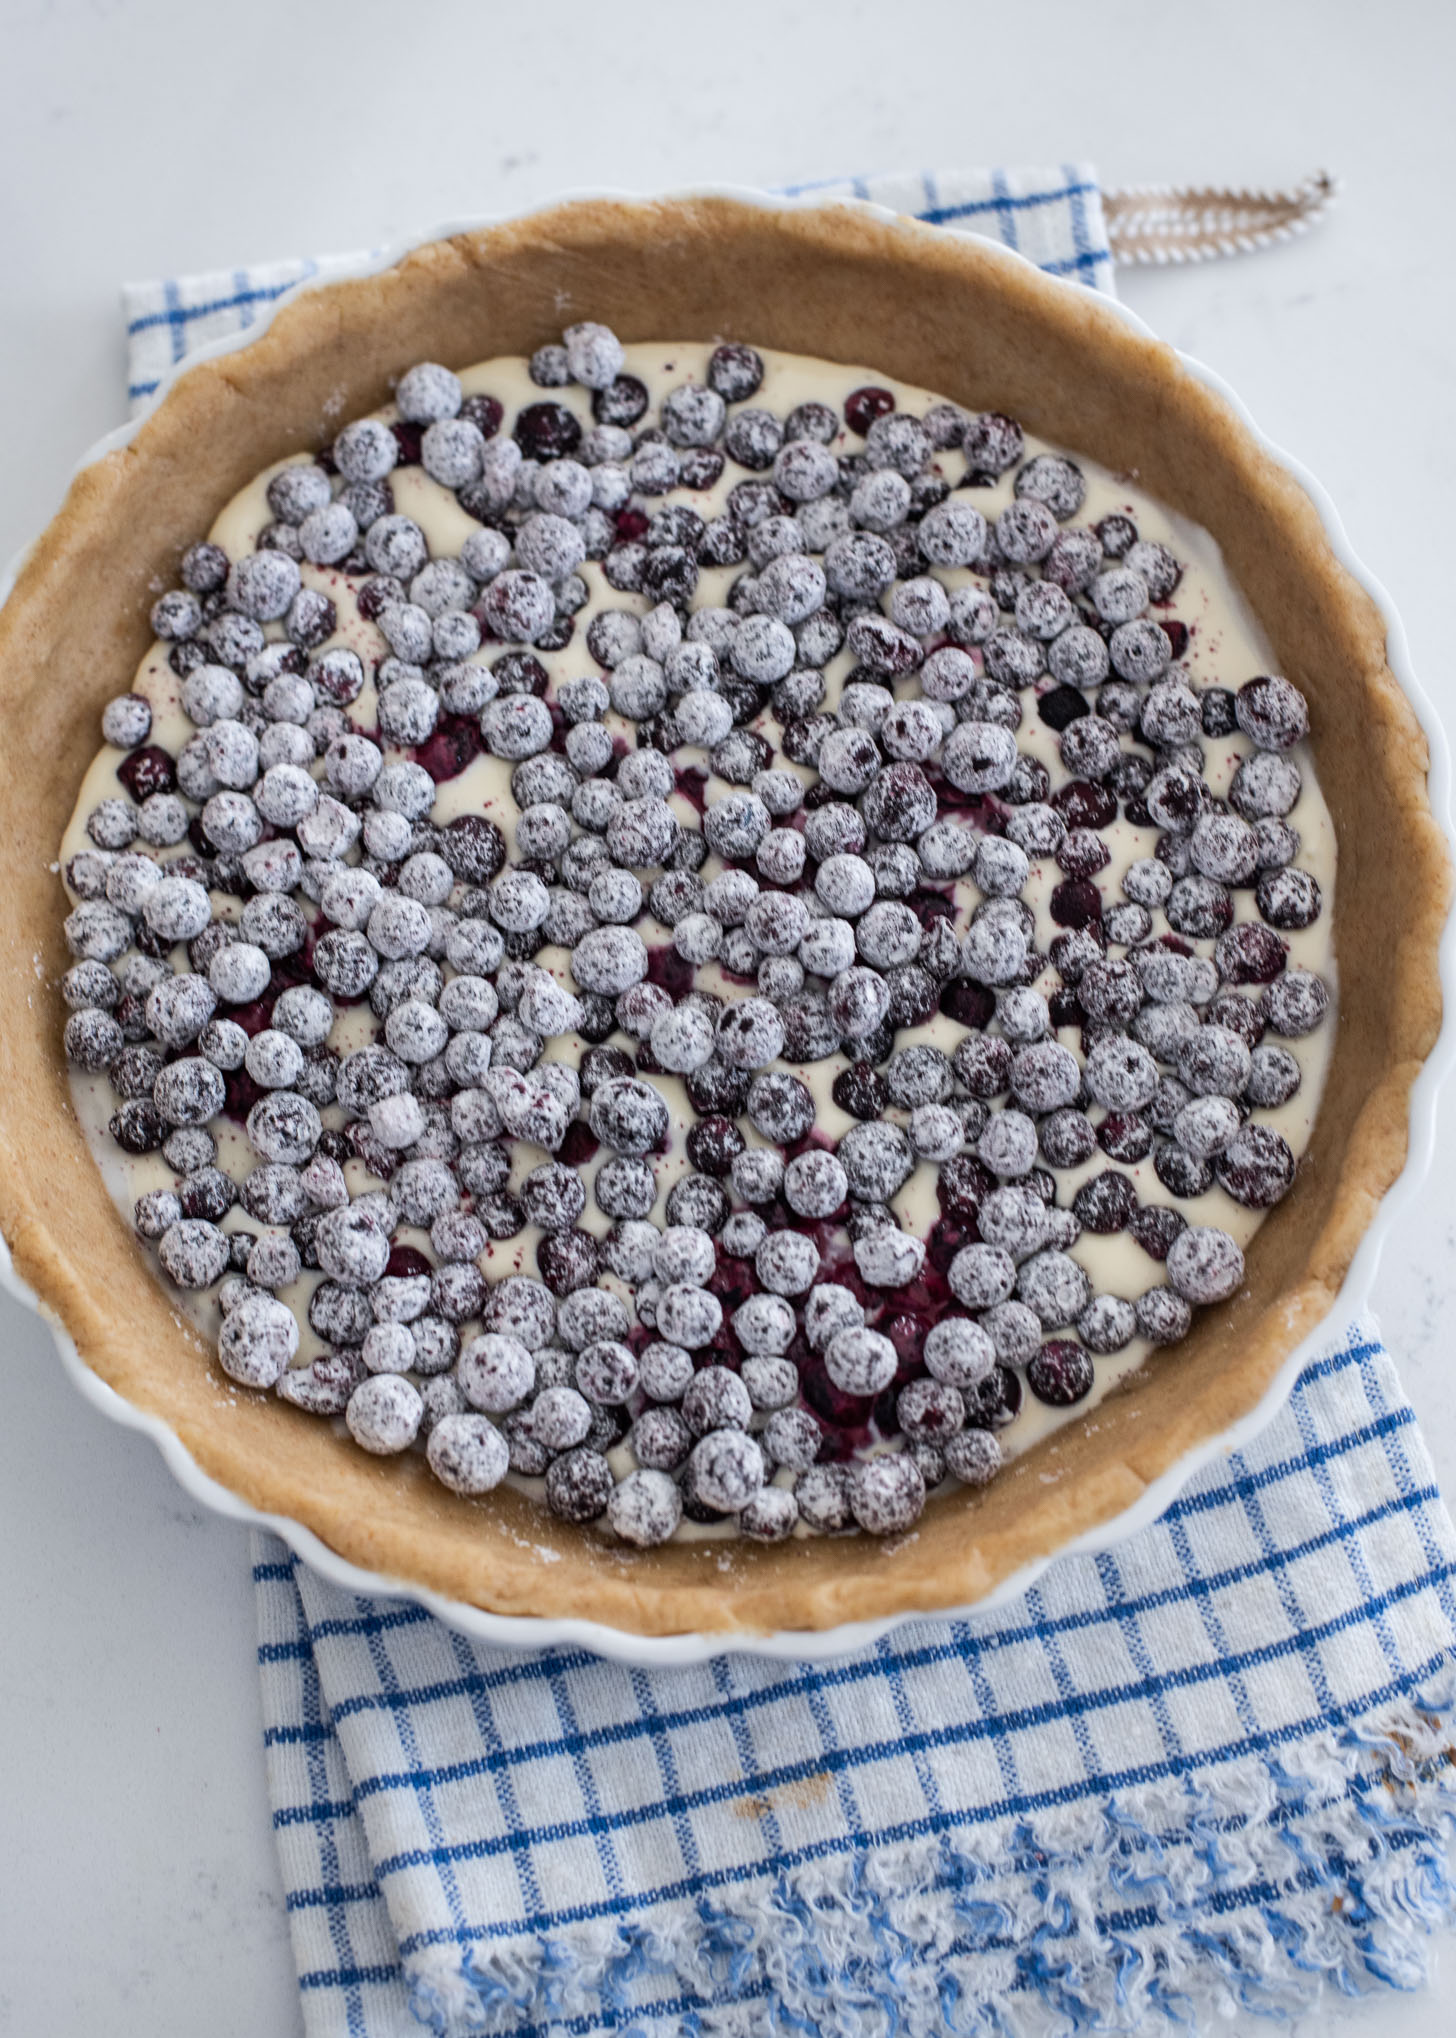 Blueberries coated with flour are placed on a cream filling in a pie crust.